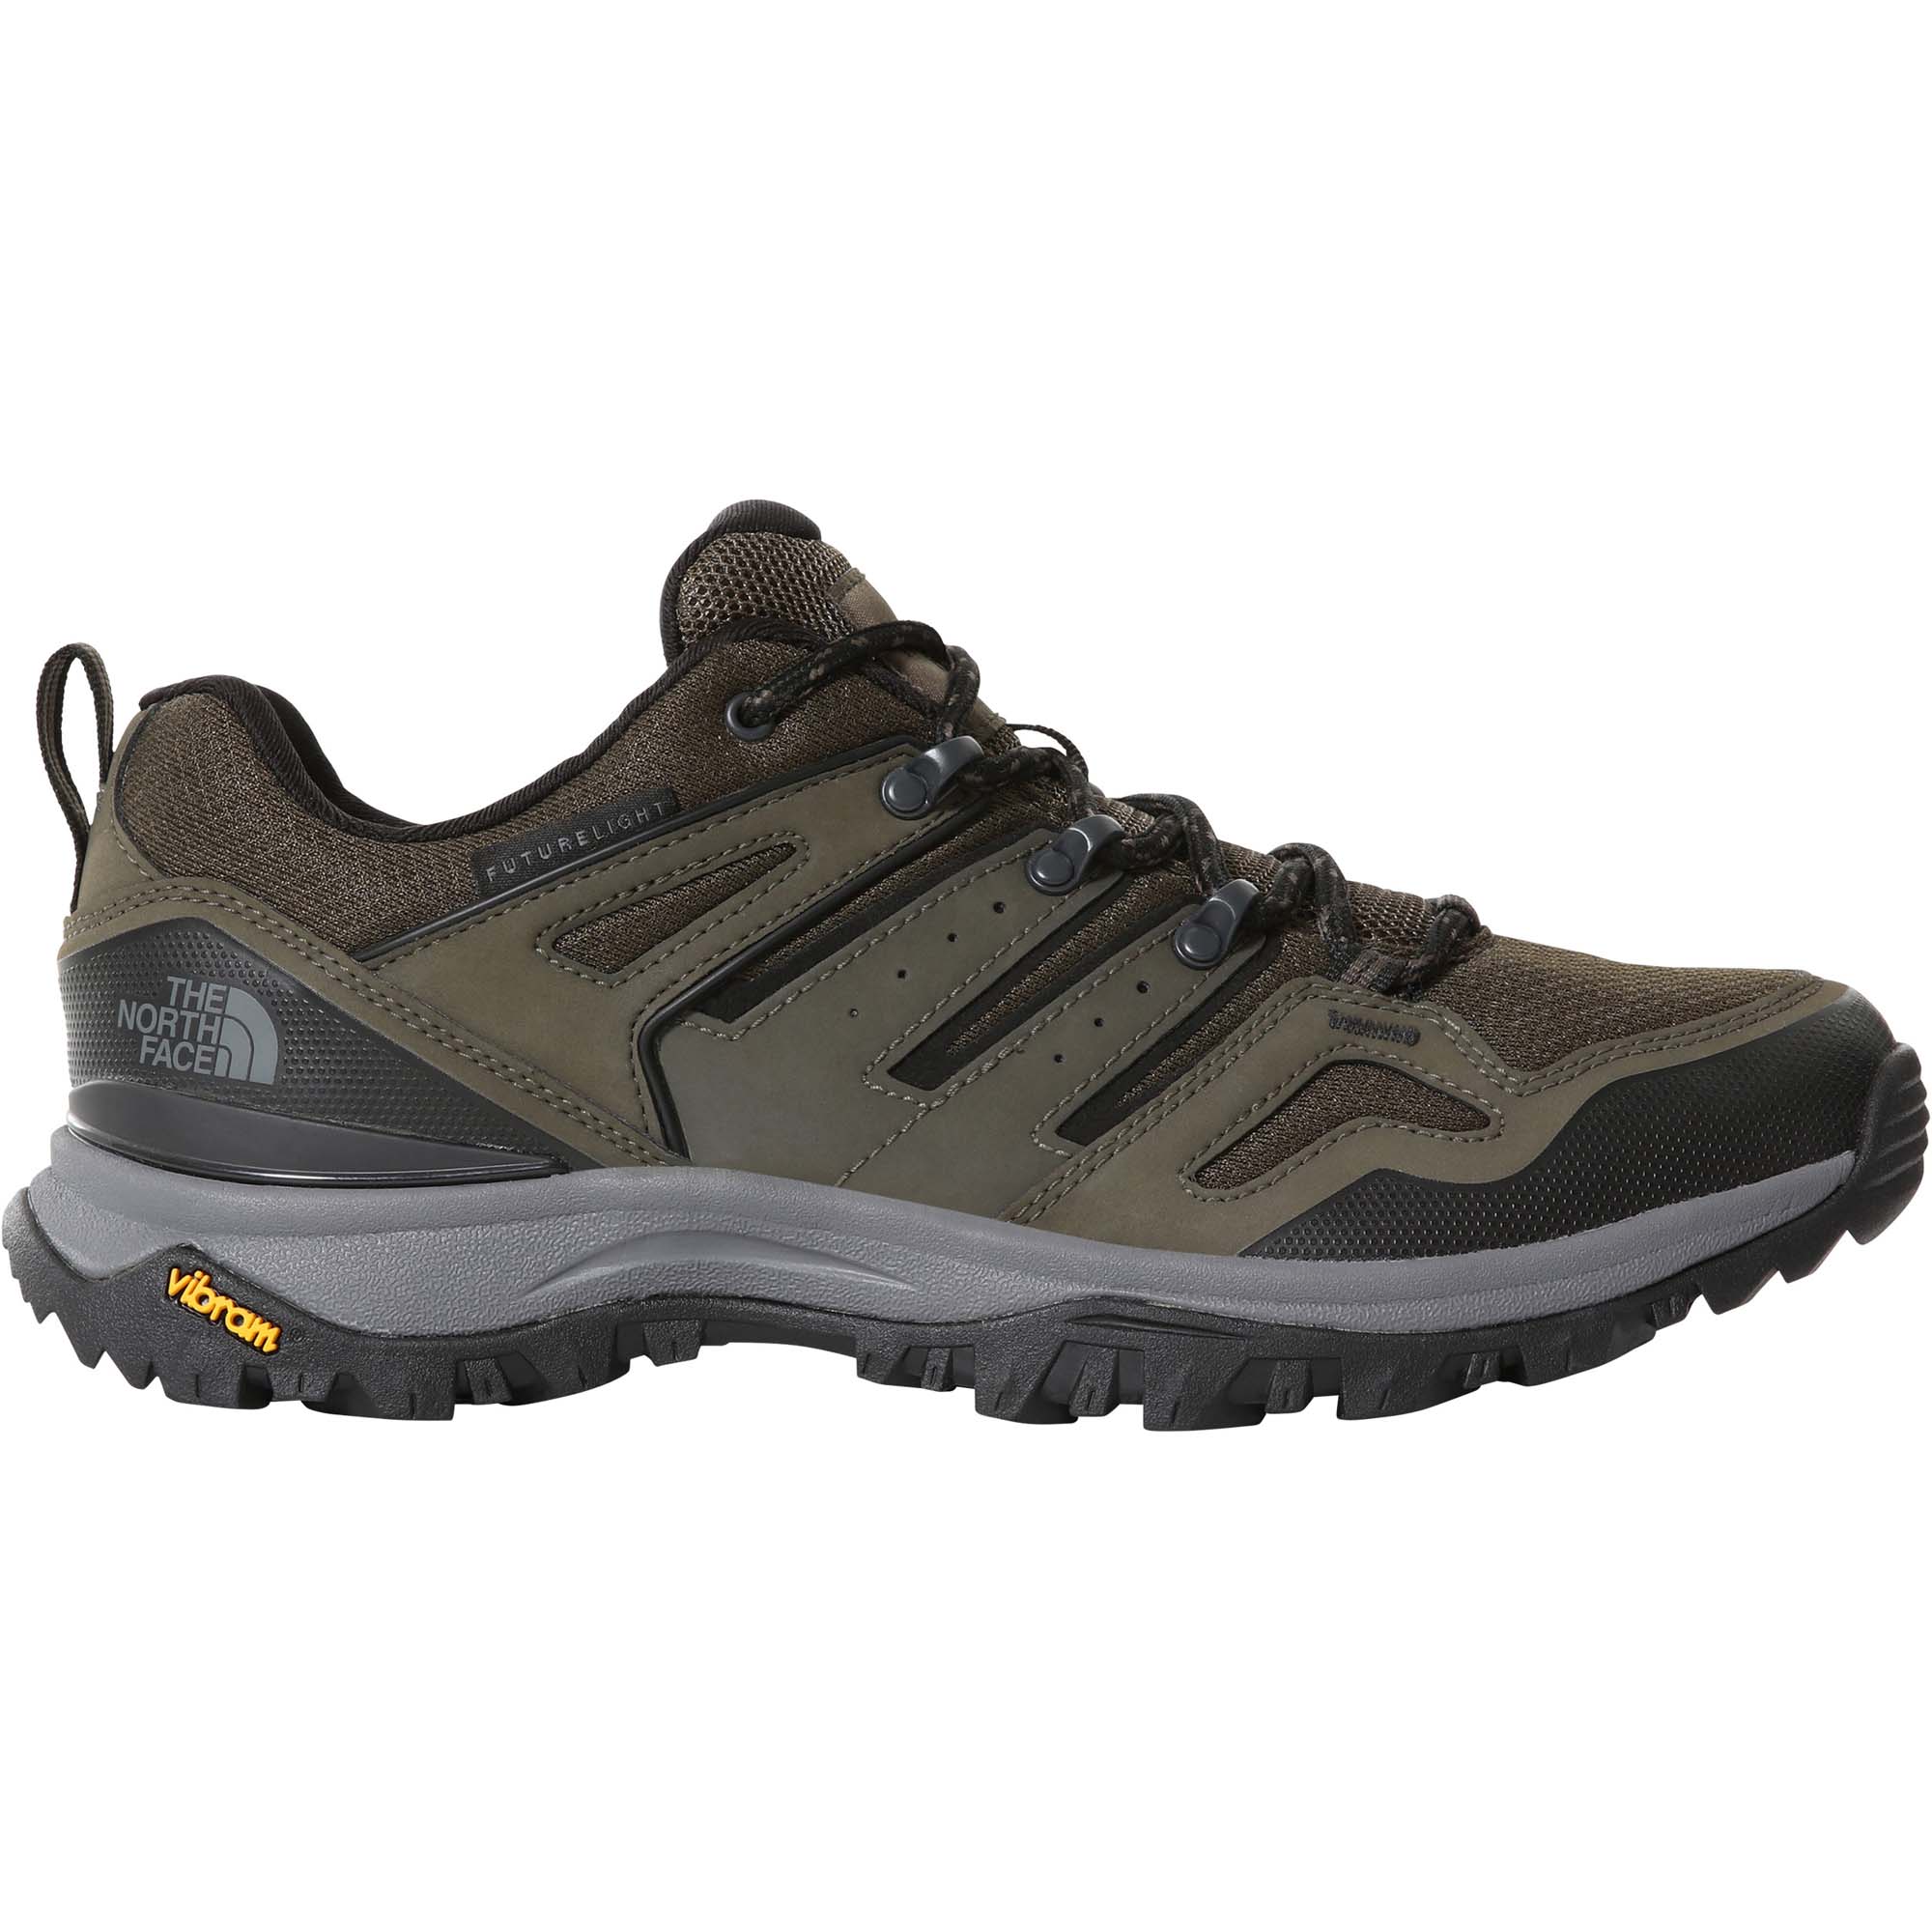 The North Face Hedgehog FutureLight Hiking Shoes